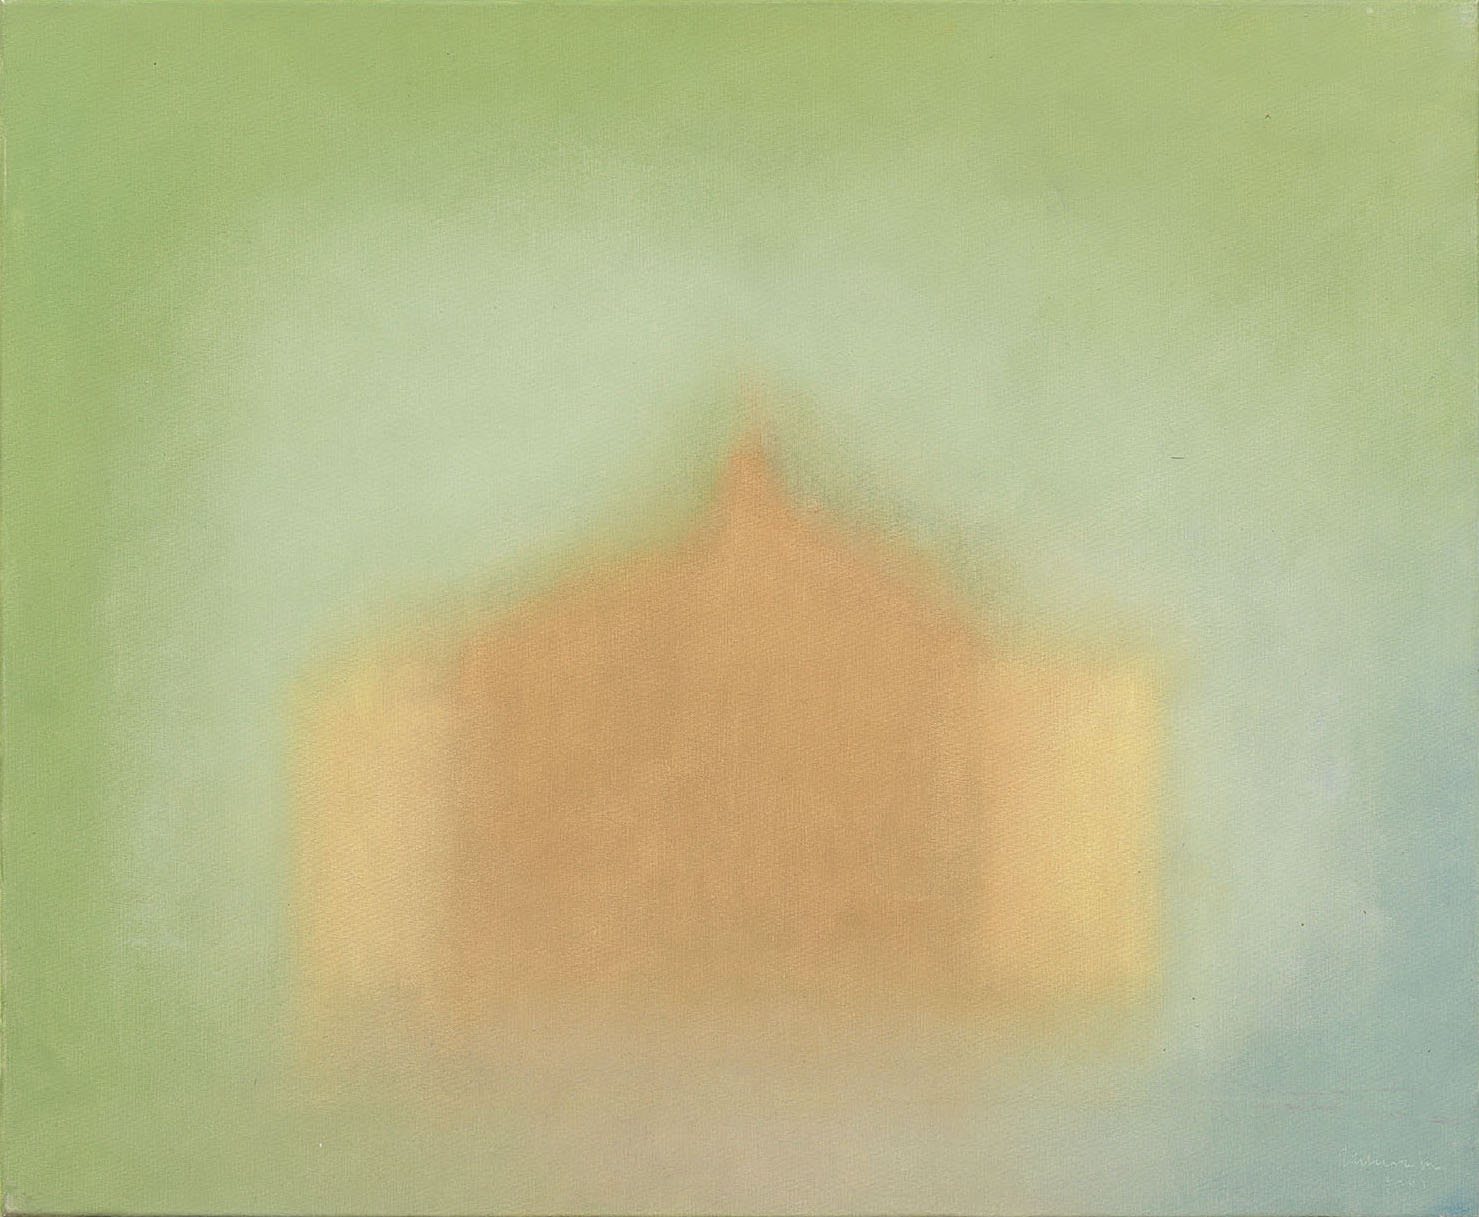 Atmosphere, 2004, oil on canvas, cm 50 x 61